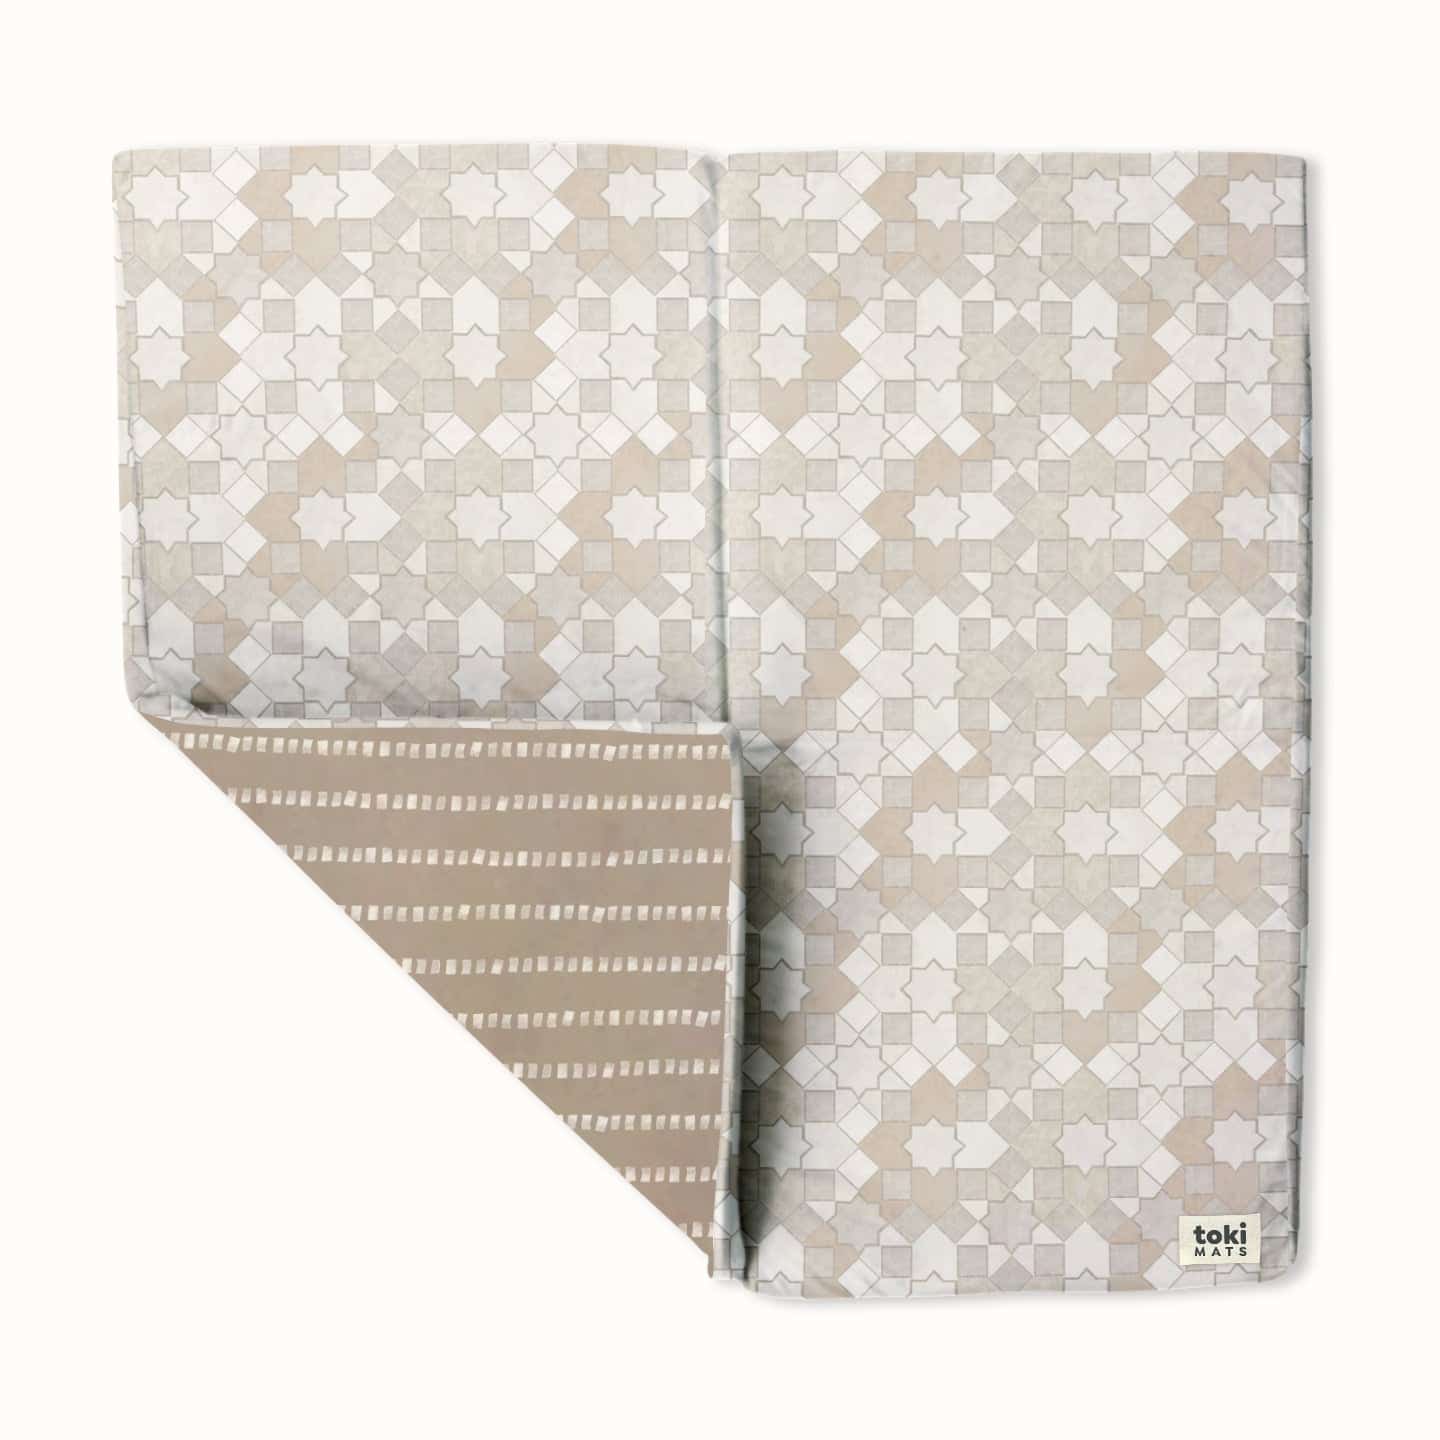 A baby play mat with a grey mosaic cover.